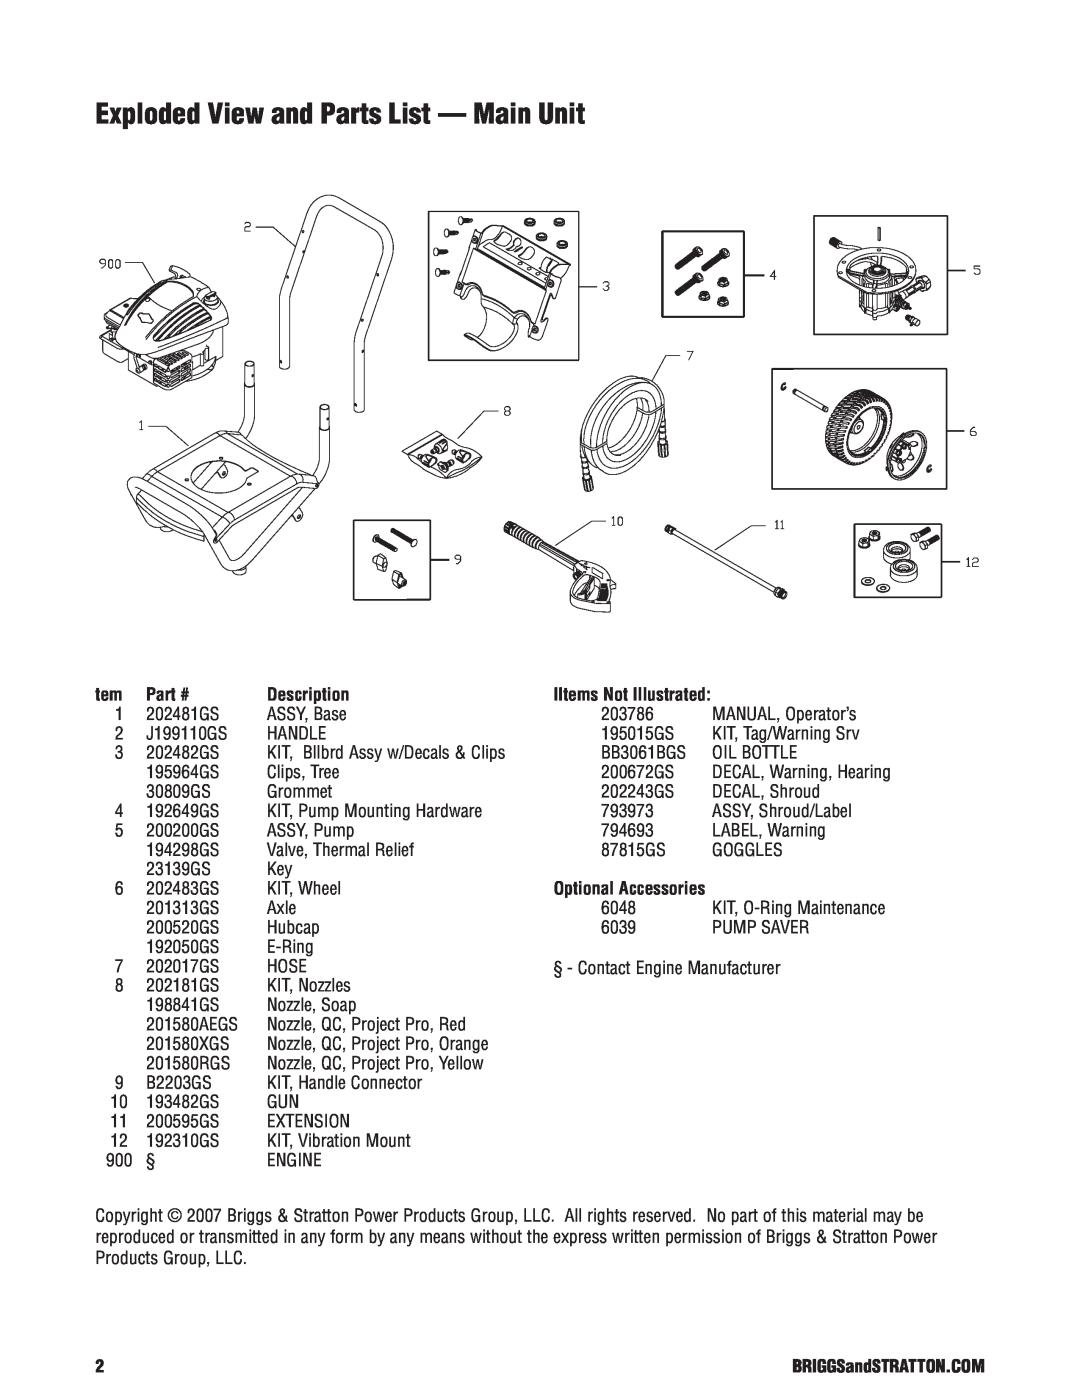 Briggs & Stratton 20305 manual Exploded View and Parts List — Main Unit, Description 